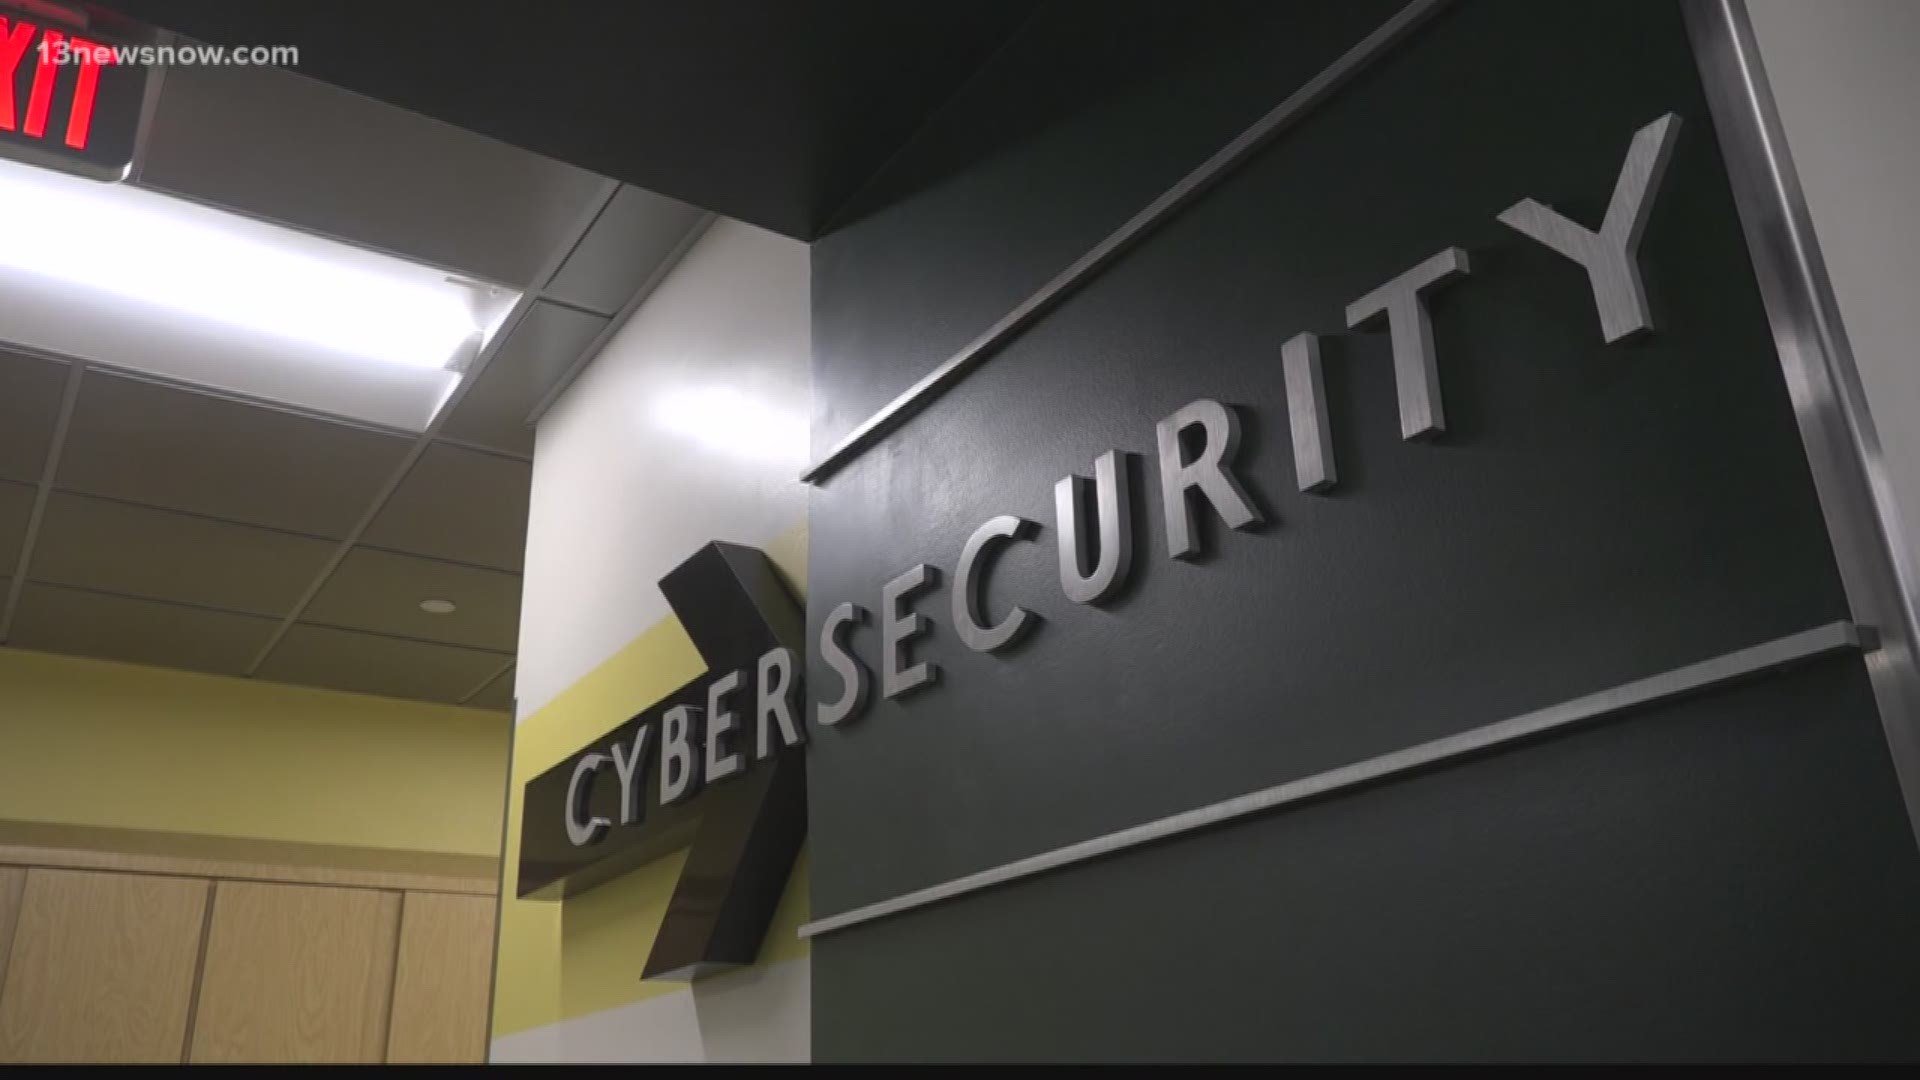 13News Now Megan Shinn has the latest on Norfolk State University's new cybersecurity complex.